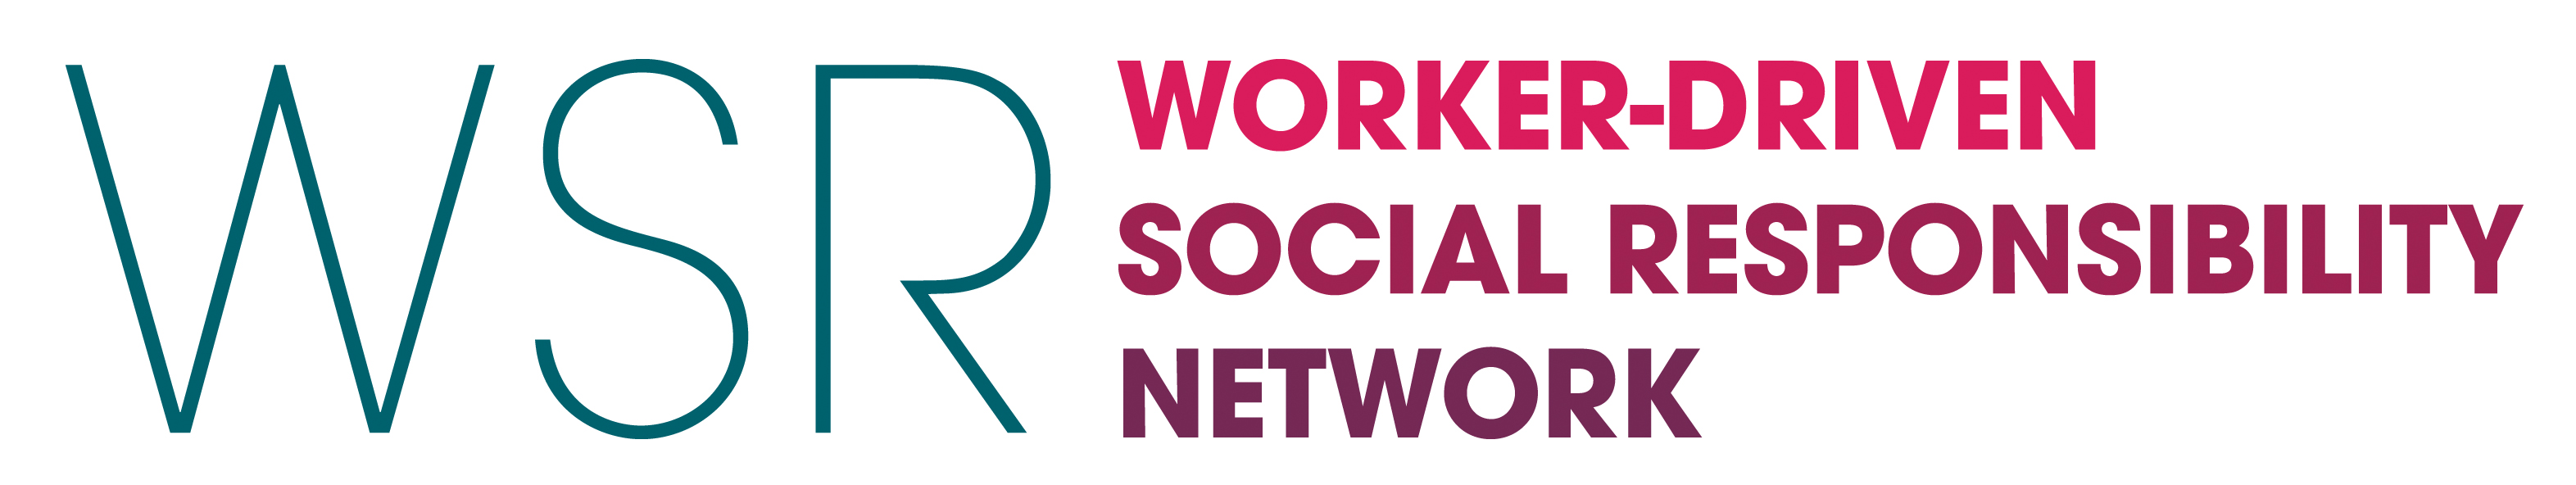 WSR - Worker-driven Social Responsibility Network